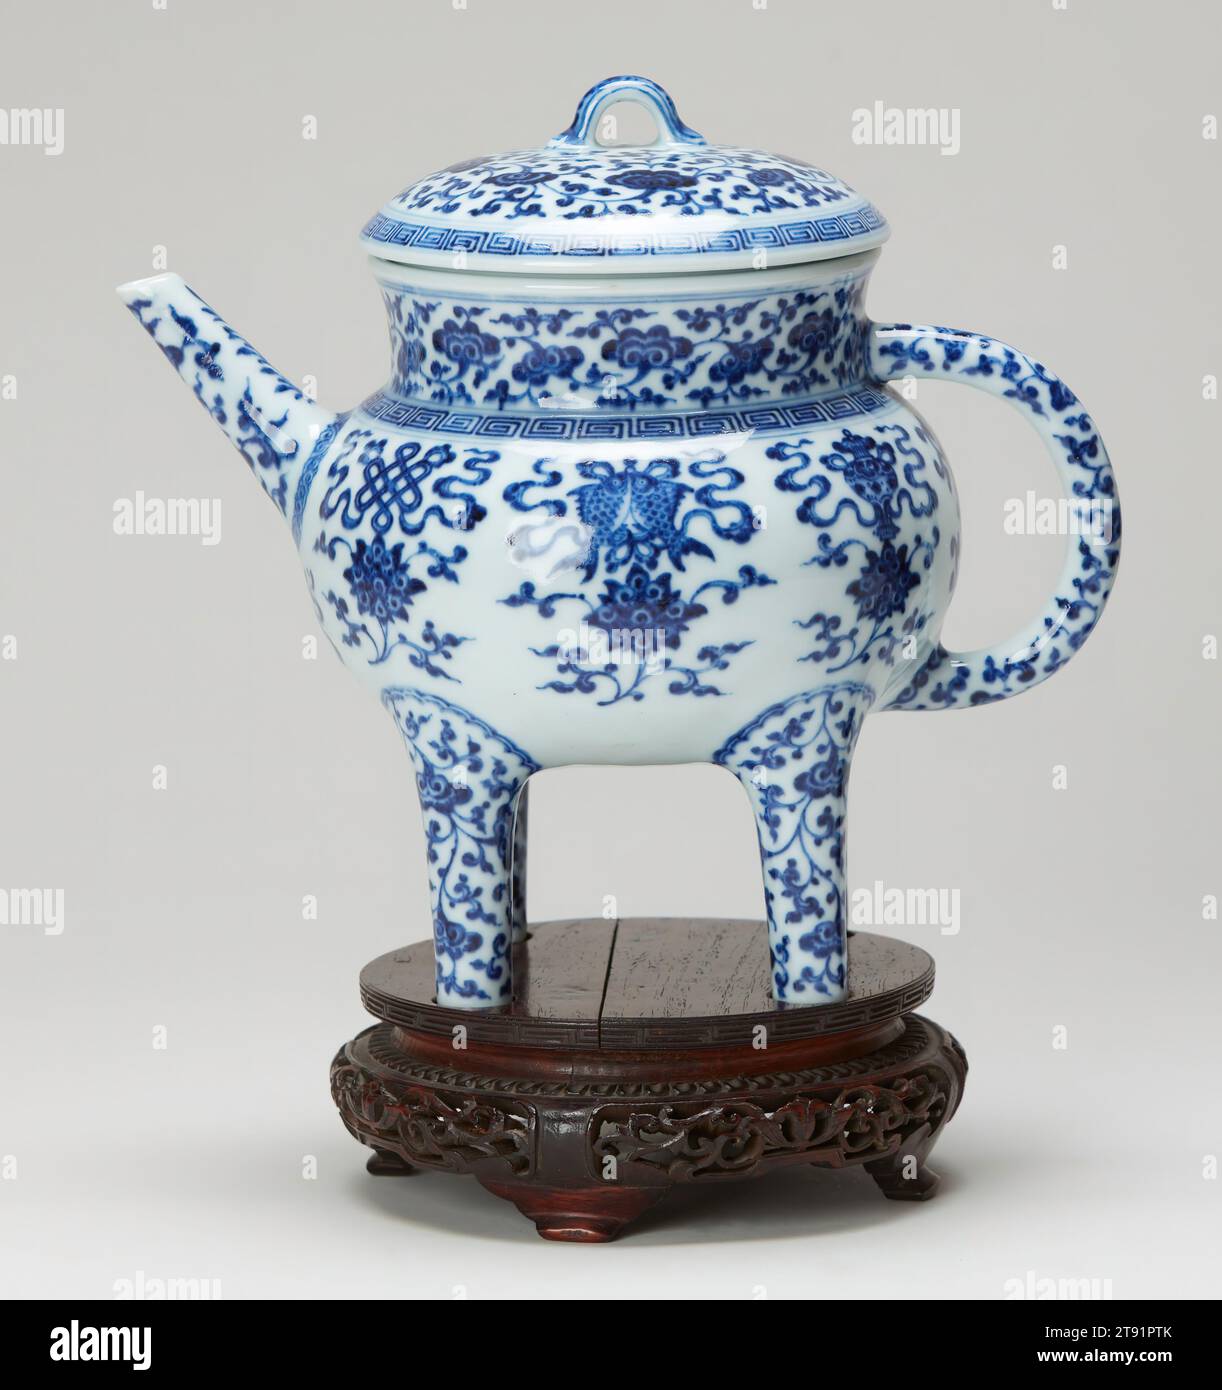 Ewer, 18th century, 8 3/4 x 9 1/4 x 6 1/8 in. (22.23 x 23.5 x 15.56 cm), Porcelain with cobalt blue decoration under a clear glaze, China, 18th century, This unusual four-legged covered ewer takes the general form of a type of ancient bronze wine vessel termed ho. The work is a fine example of the use of an ancient bronze shape in combination with designs painted in underglaze blue-and-white. The rare decorative pattern consists of numerous ling-chih fungus (the fungus of immortality) set against an overall tendril design. The eight Buddhist emblems Stock Photo